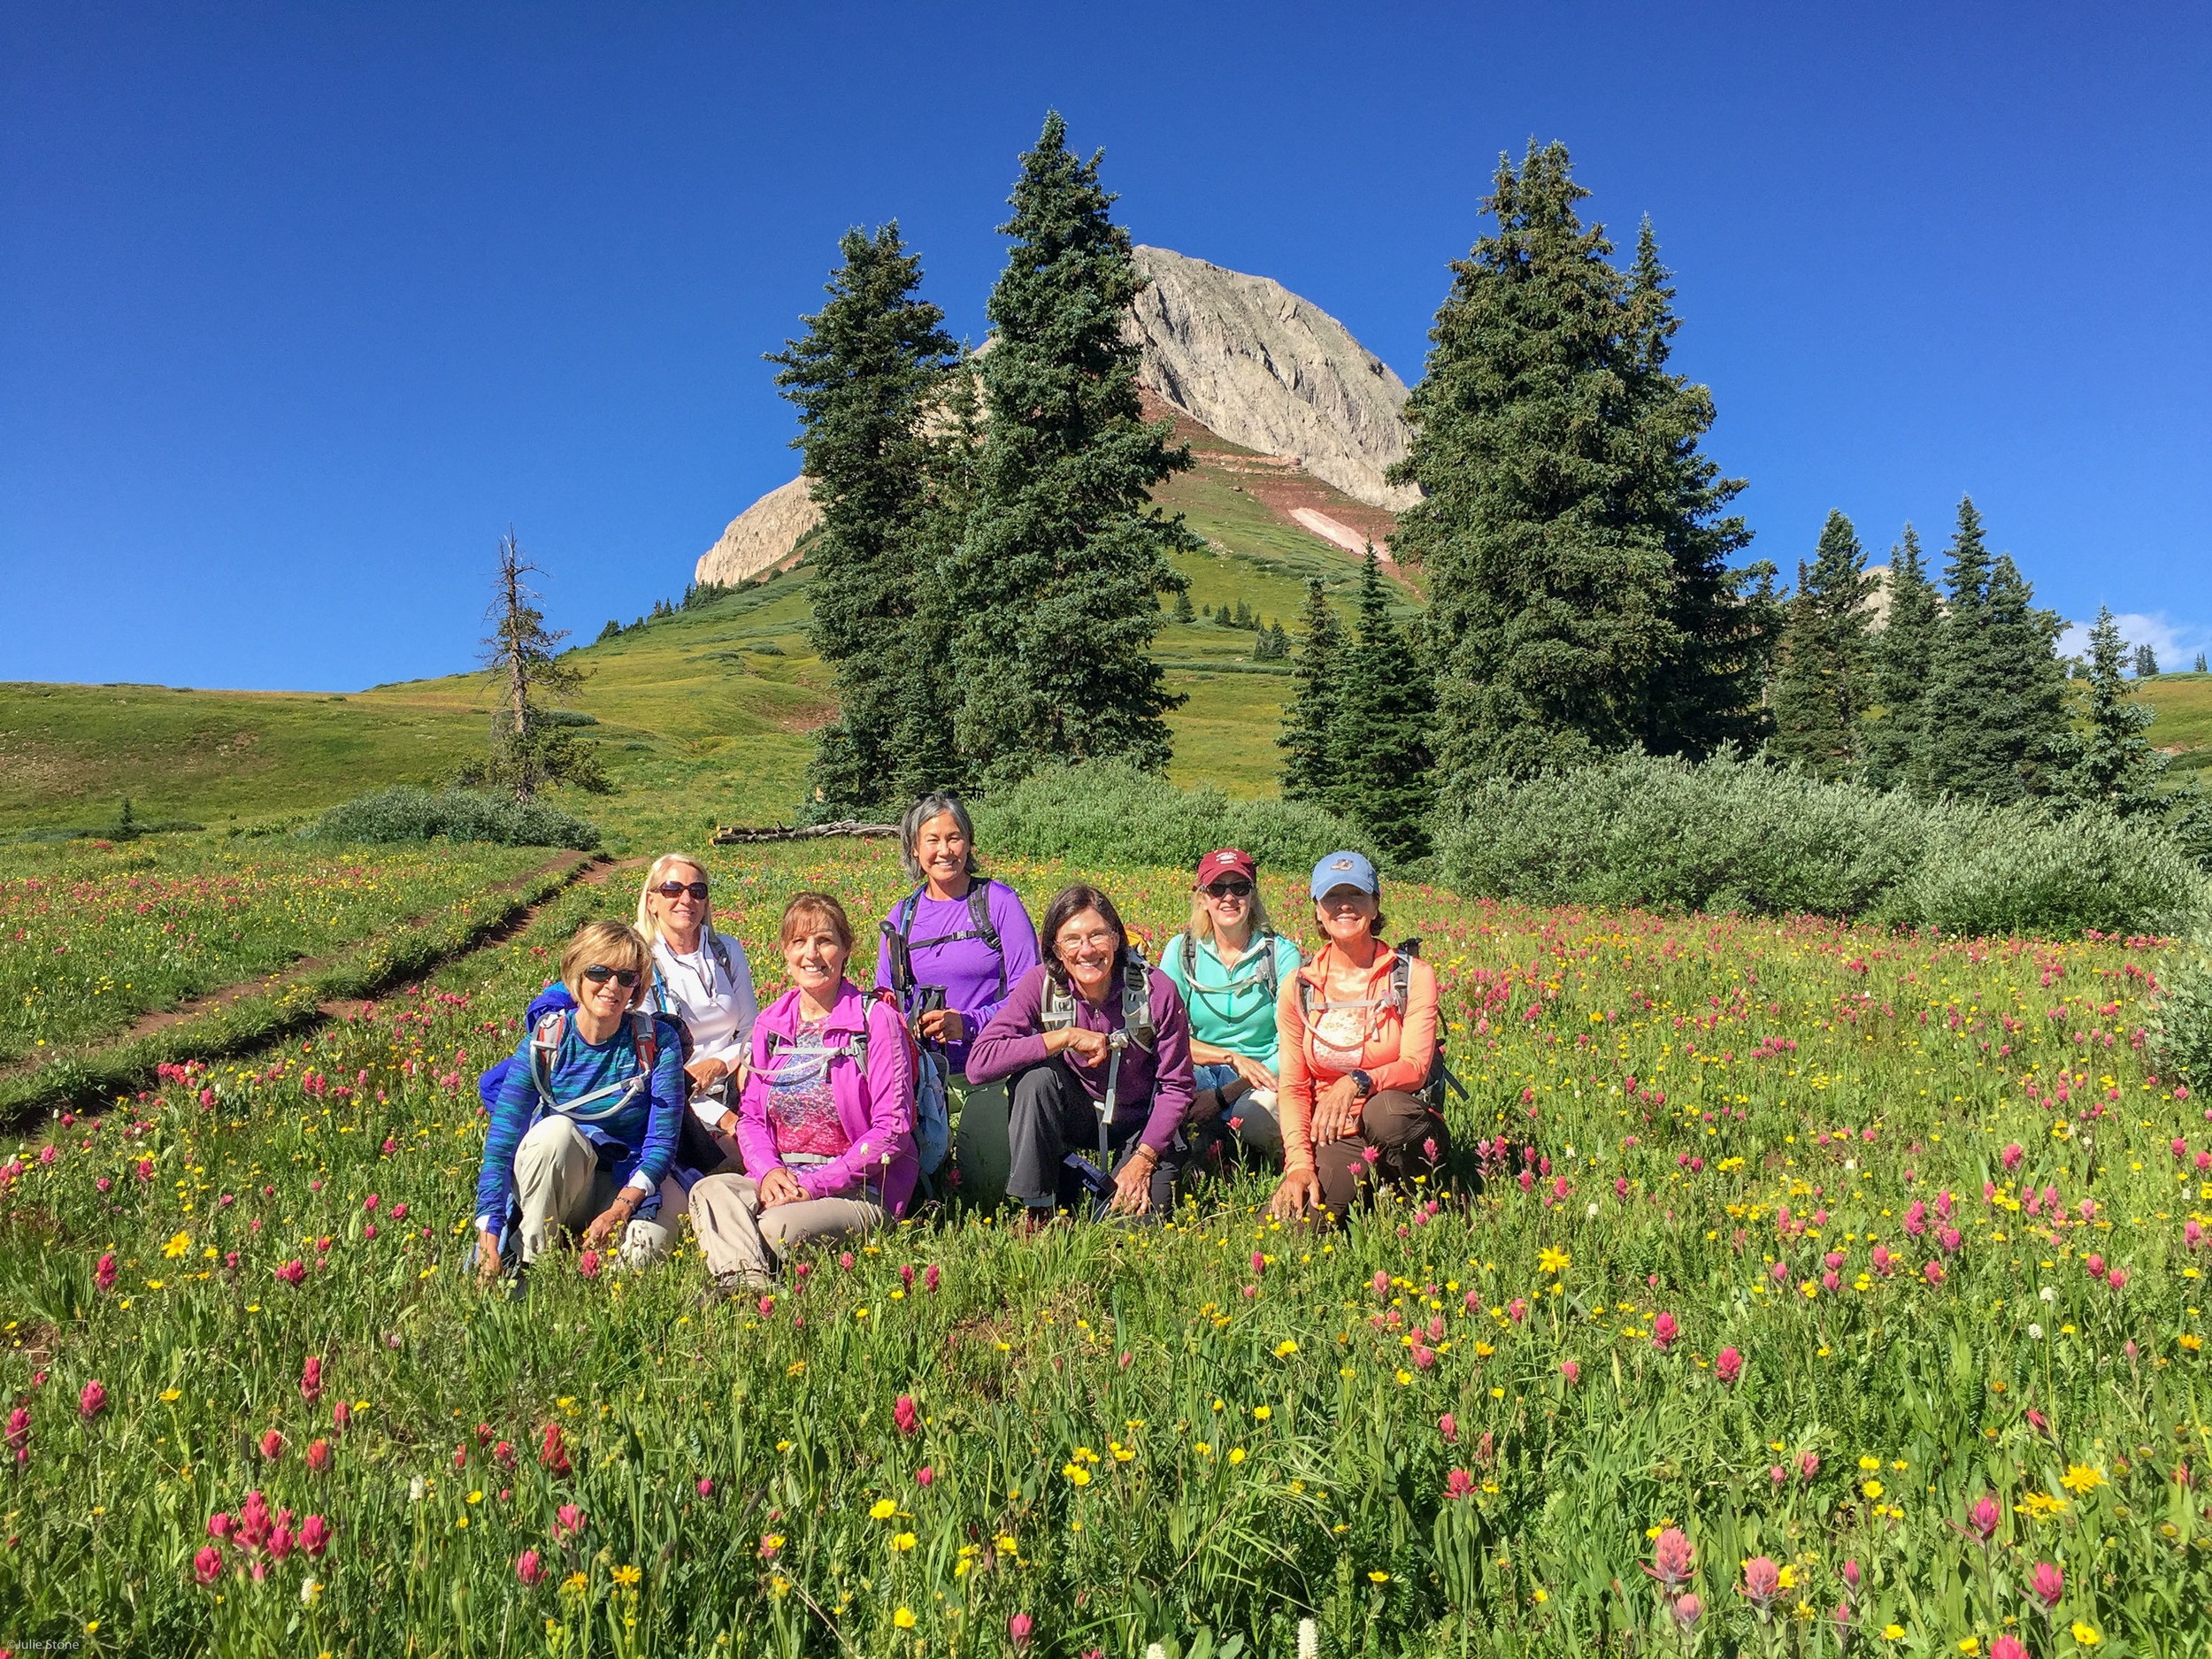 Group shot taken in Engineer Meadow. The wildflowers are incredible. But where is Marcie???